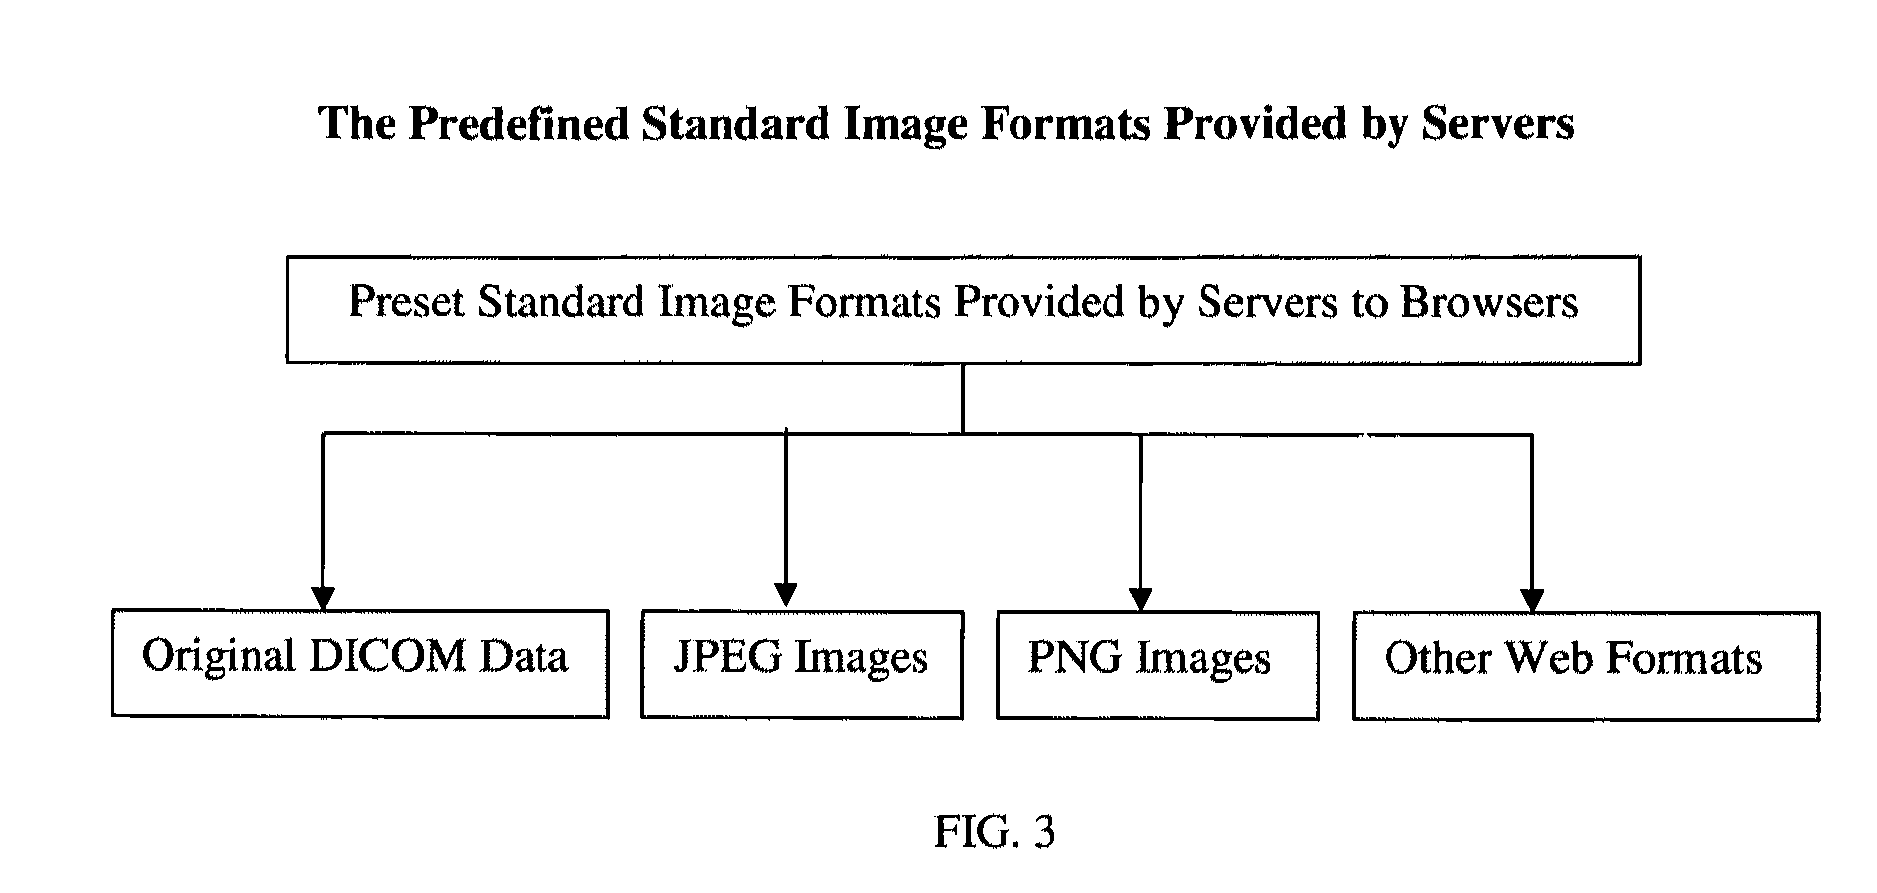 Adaptive distributed medical image viewing and manipulating systems